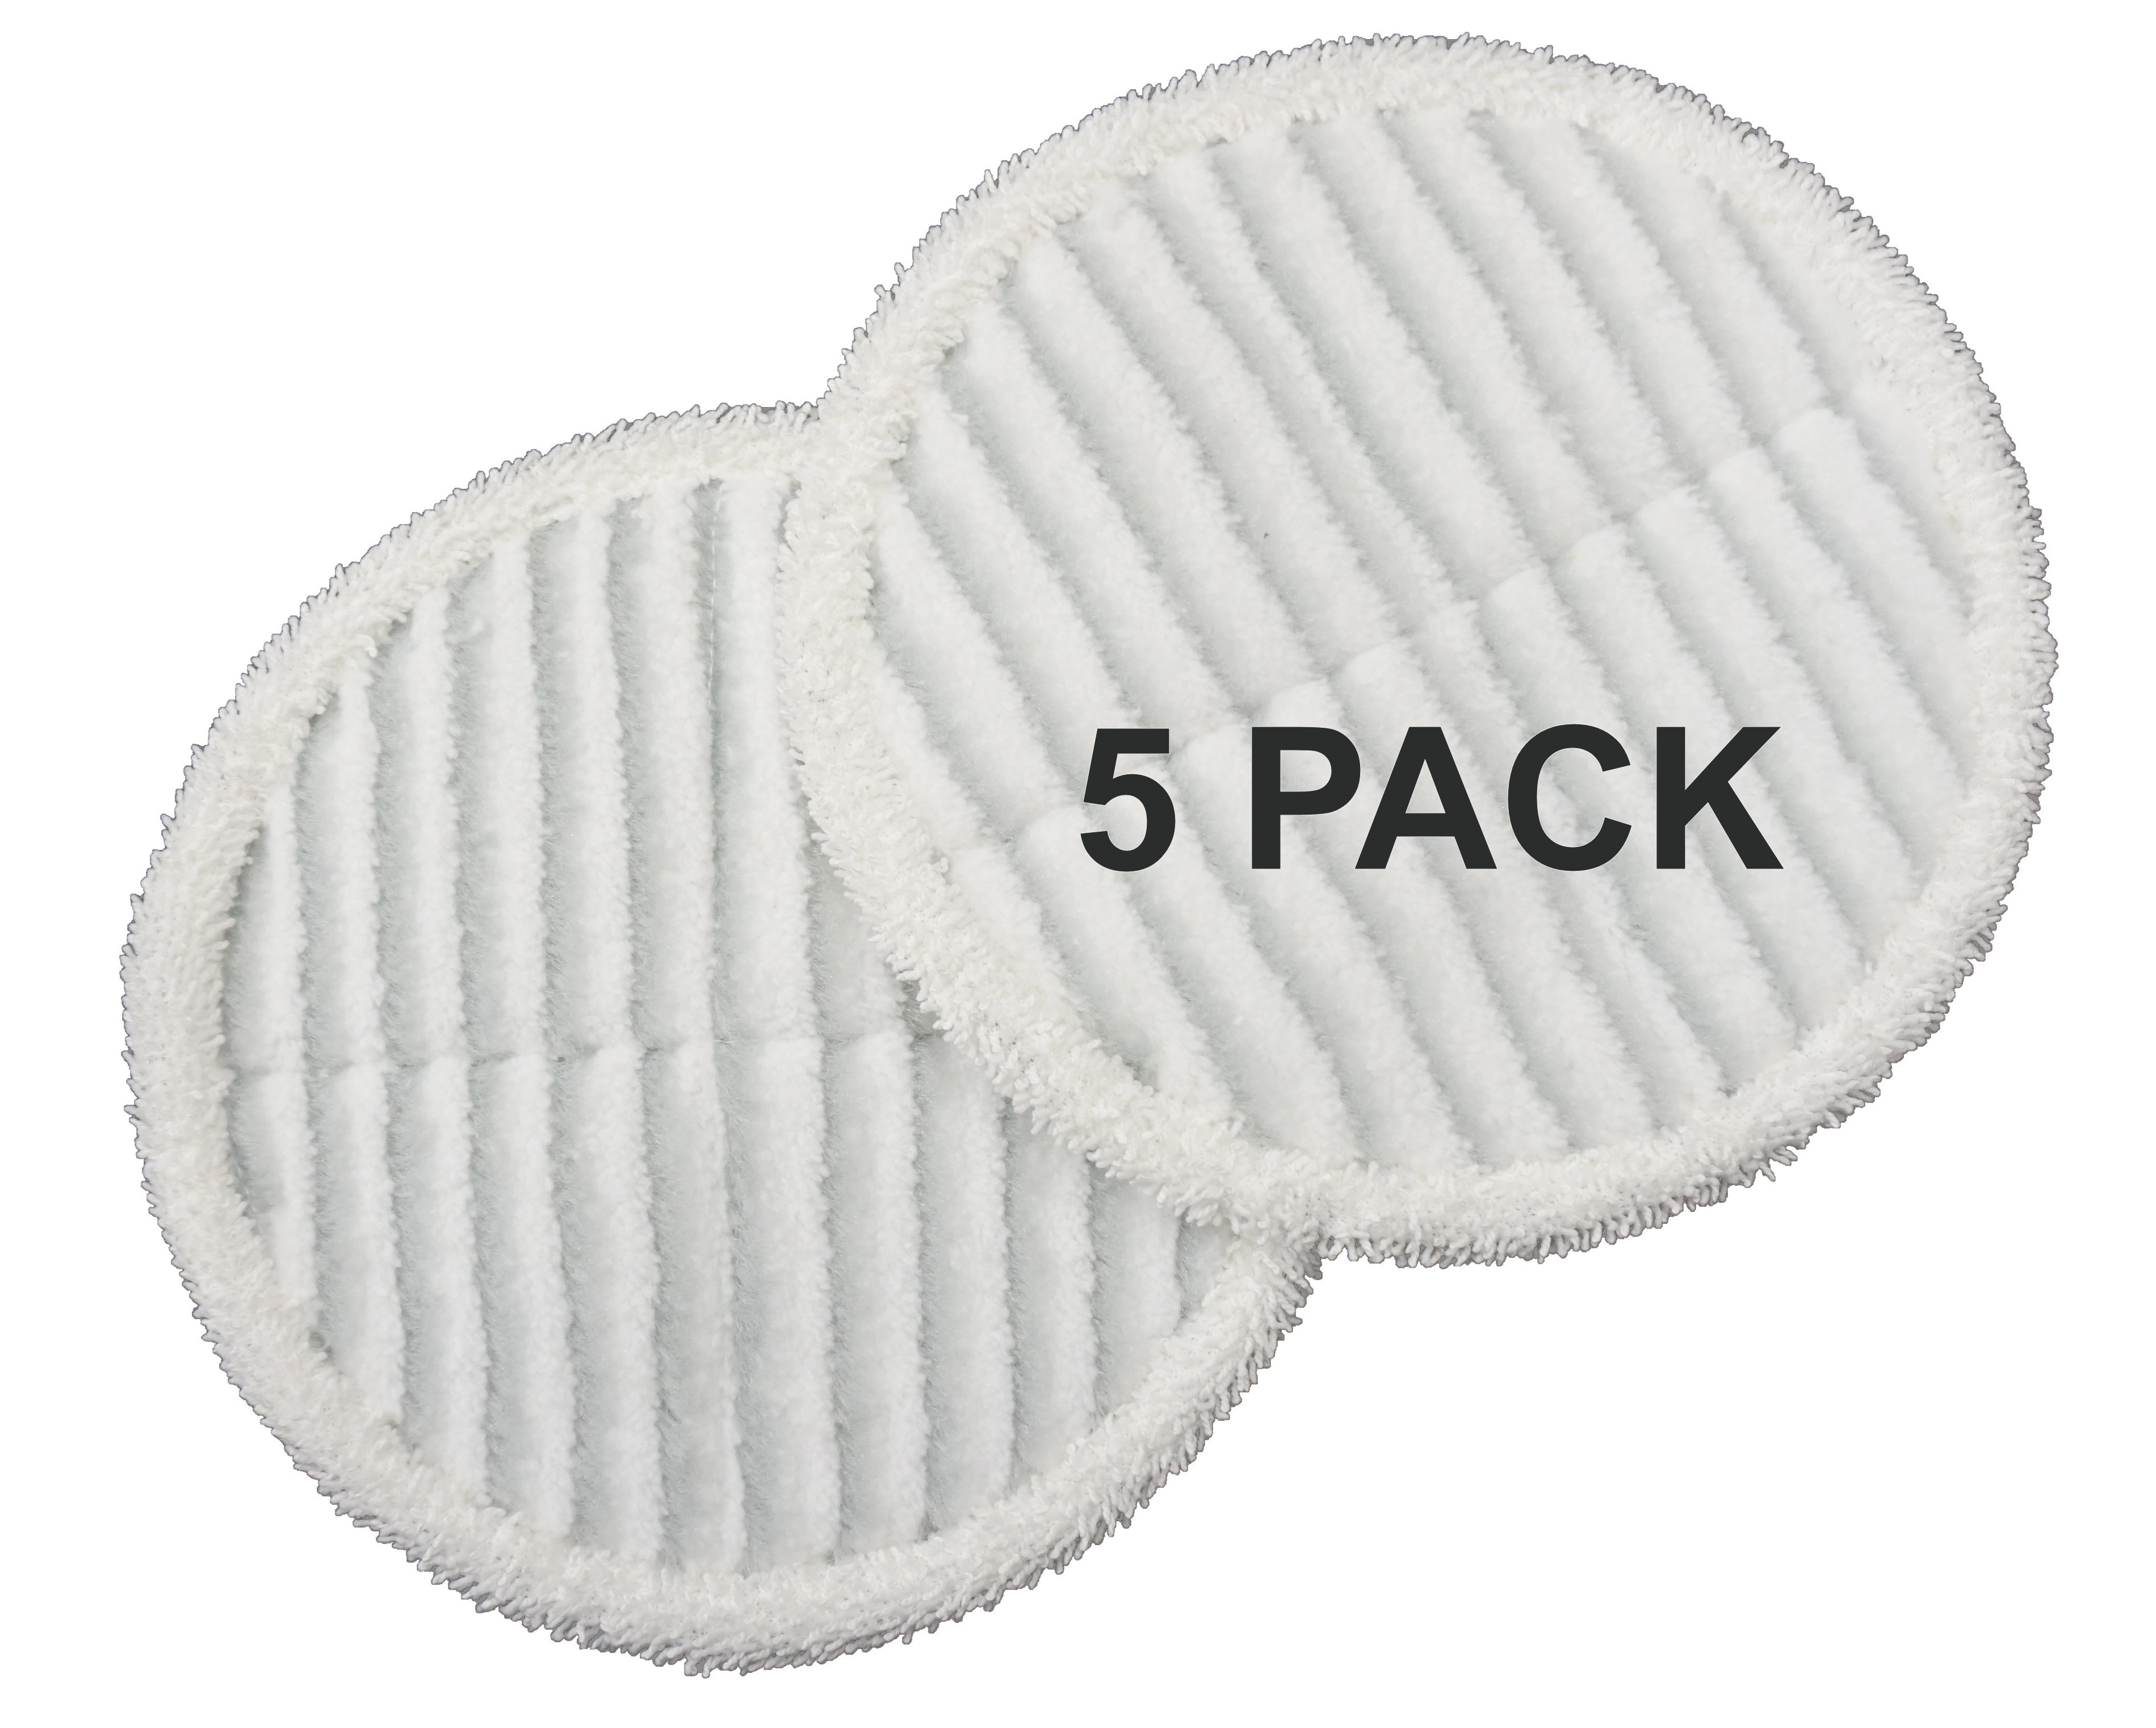 Bissell Scrubby Mop Pads, 5 Pack, 10 Pieces, for Spinwave Hard Floor, 1611298 - image 1 of 3